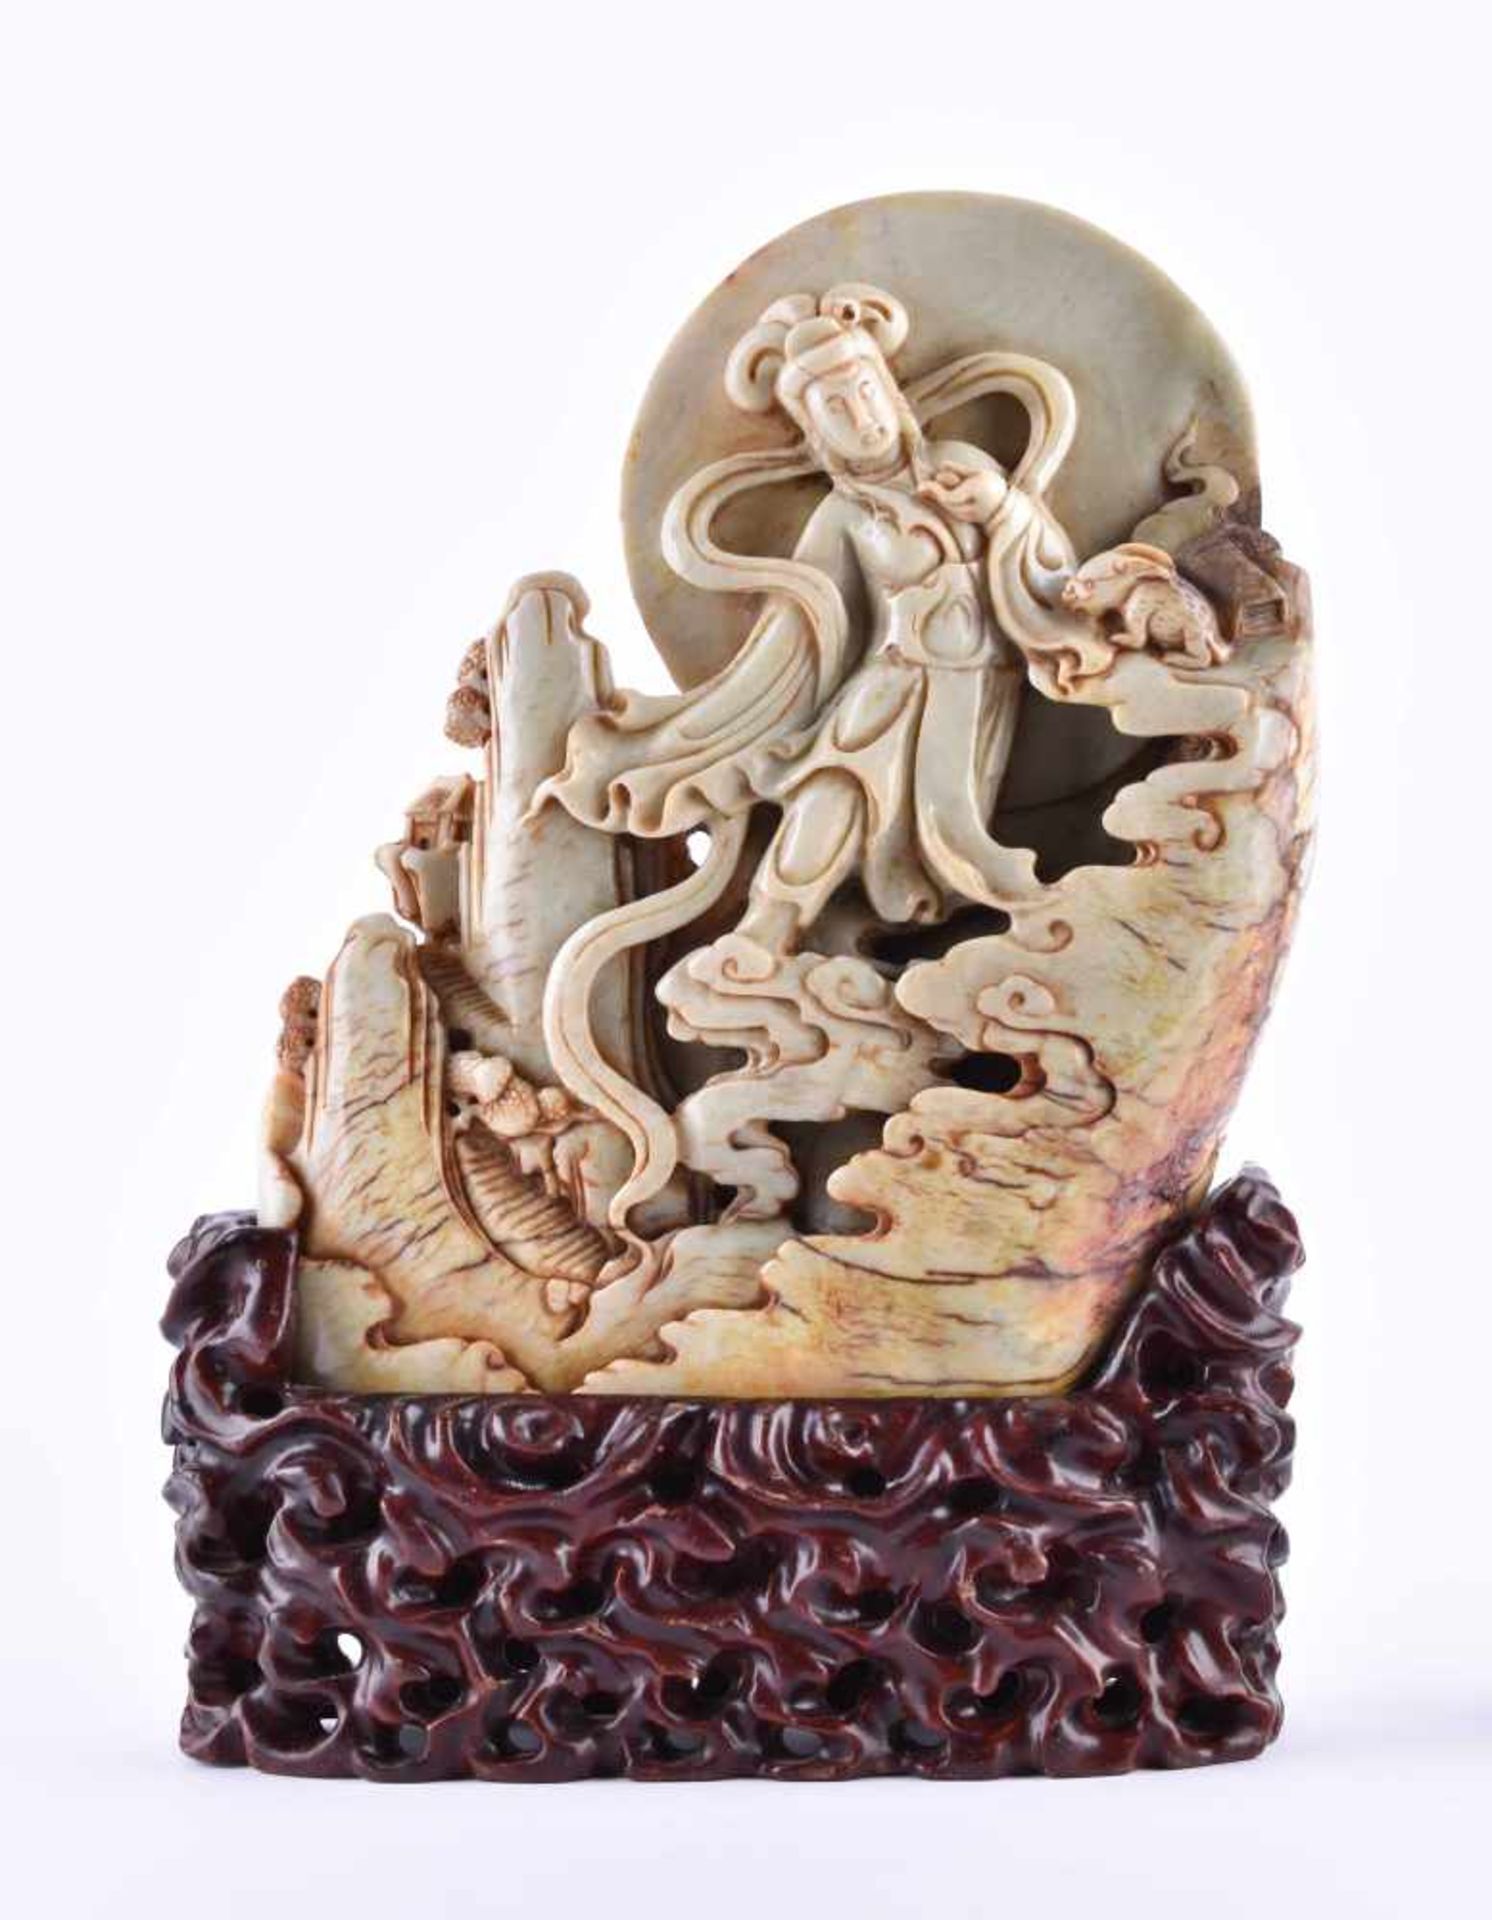 Large jade carving China Republic periodfinely carved on the front and back, standing on a wooden